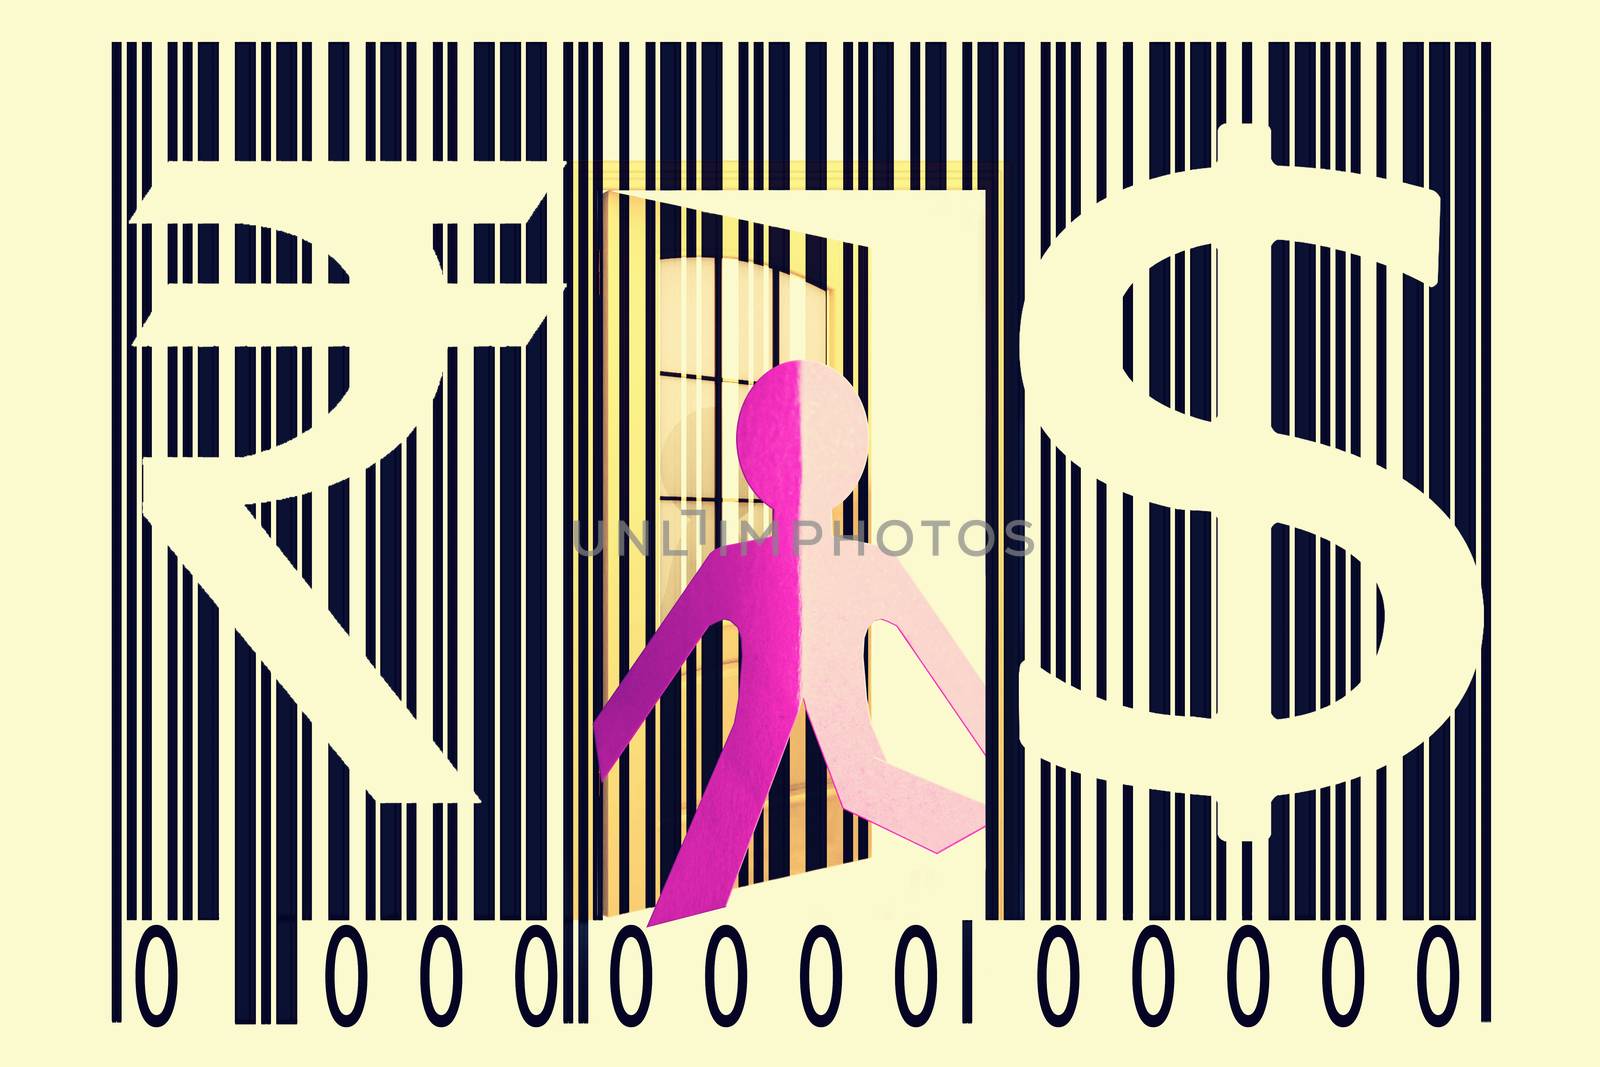 Paperman coming out of a bar code with Dollar and Rupee Signs by yands